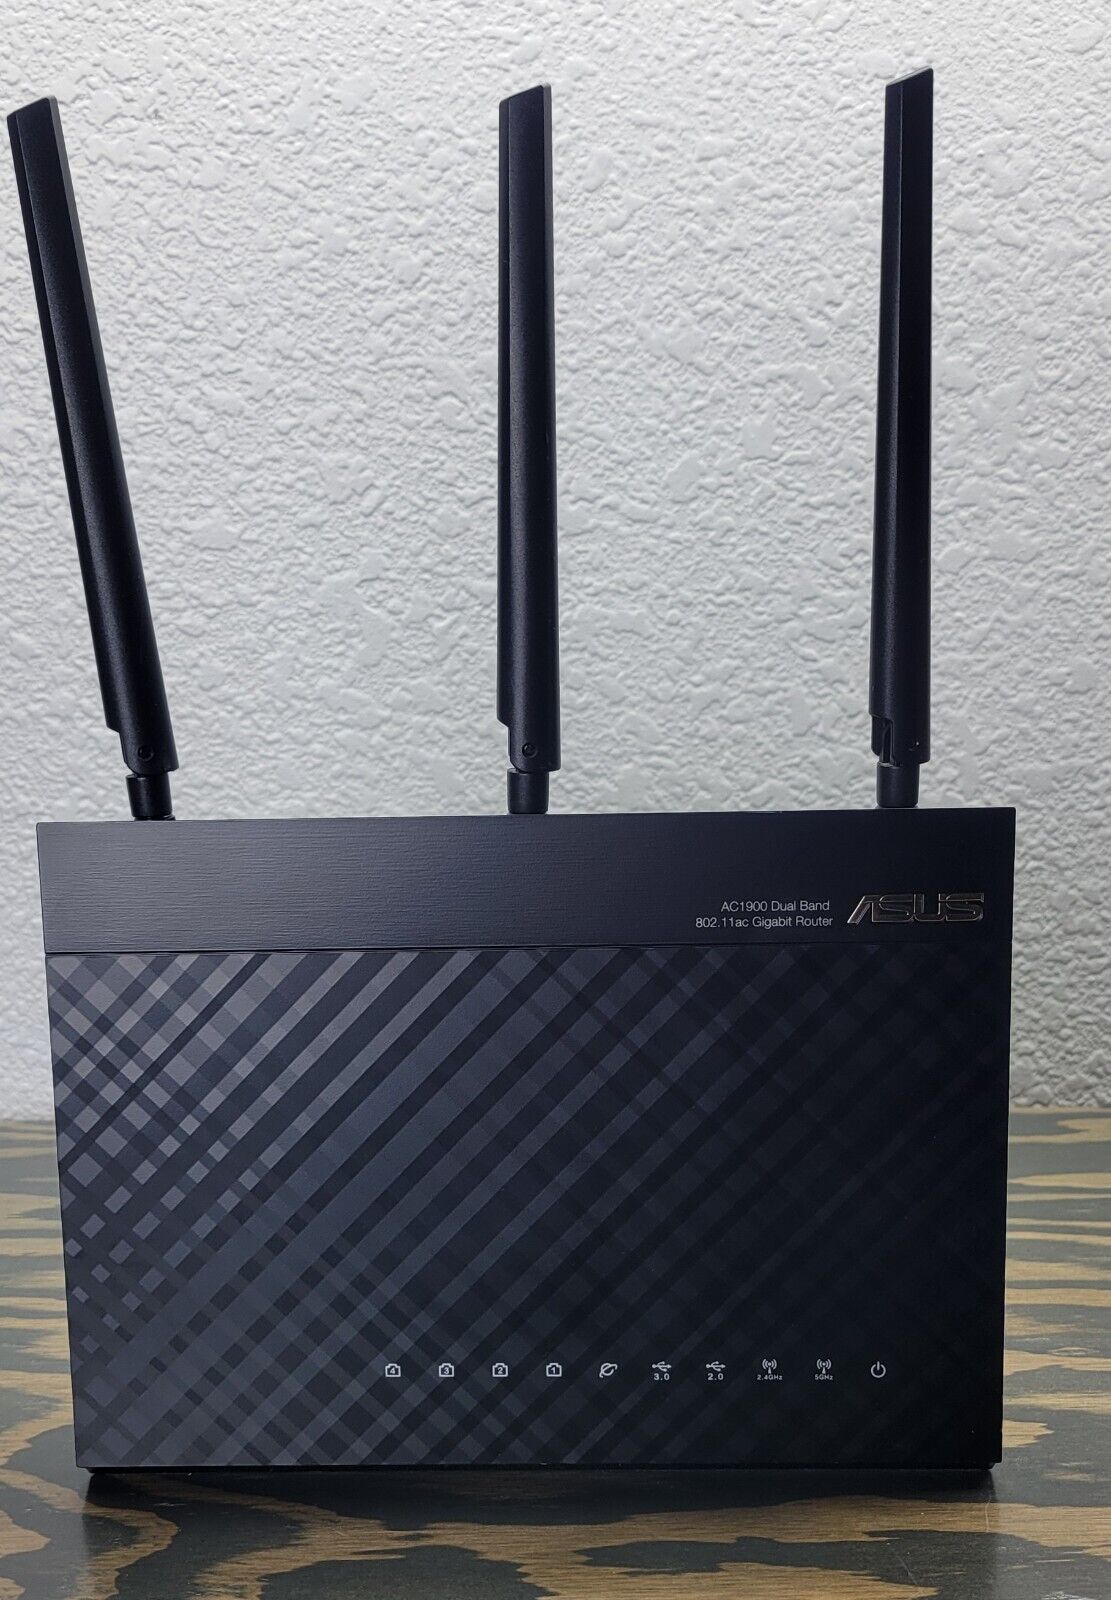 ASUS AC1900 Dual Band Wireless Router Model RT-AC68U NO CHARGER